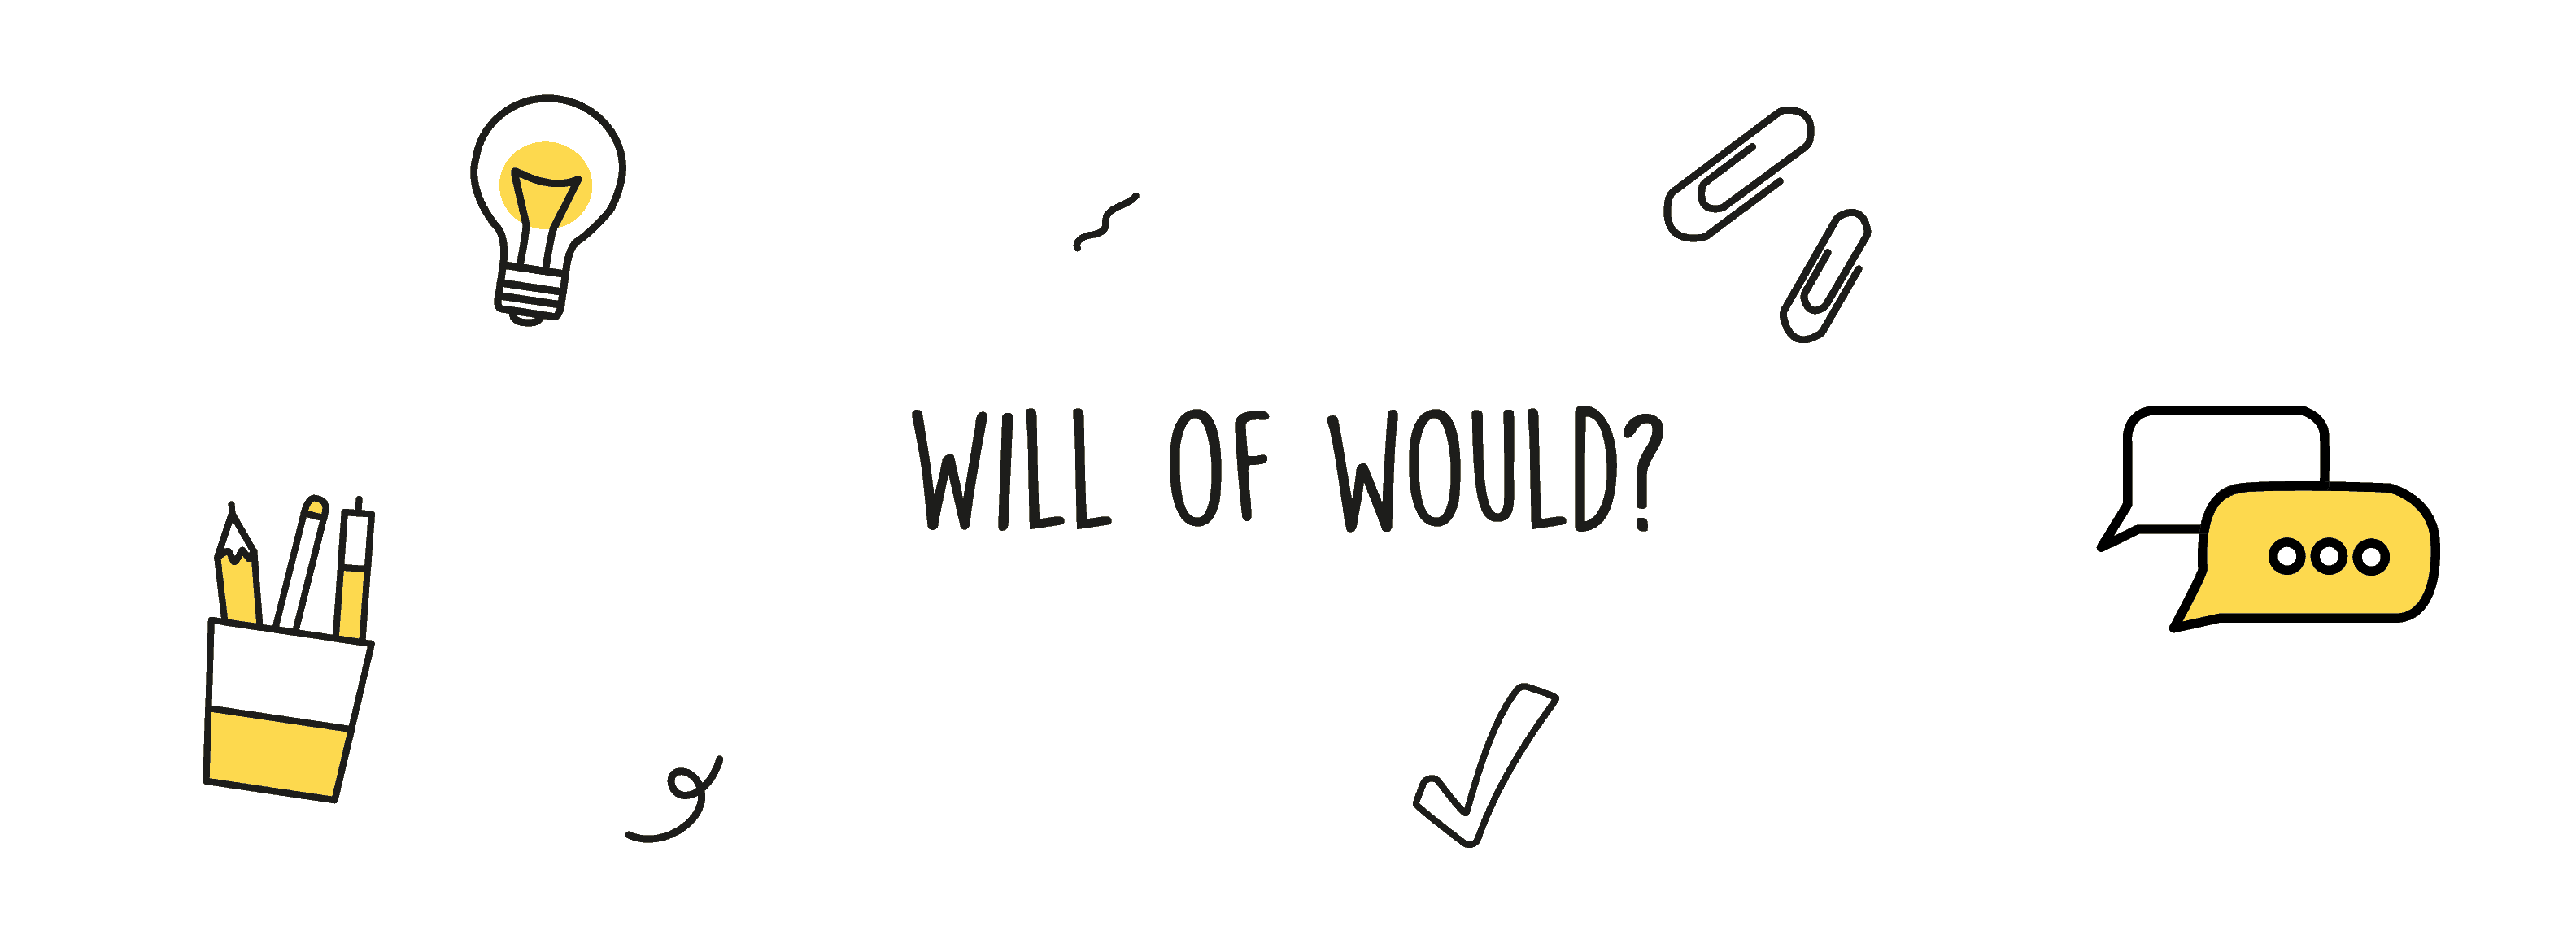 Will of would